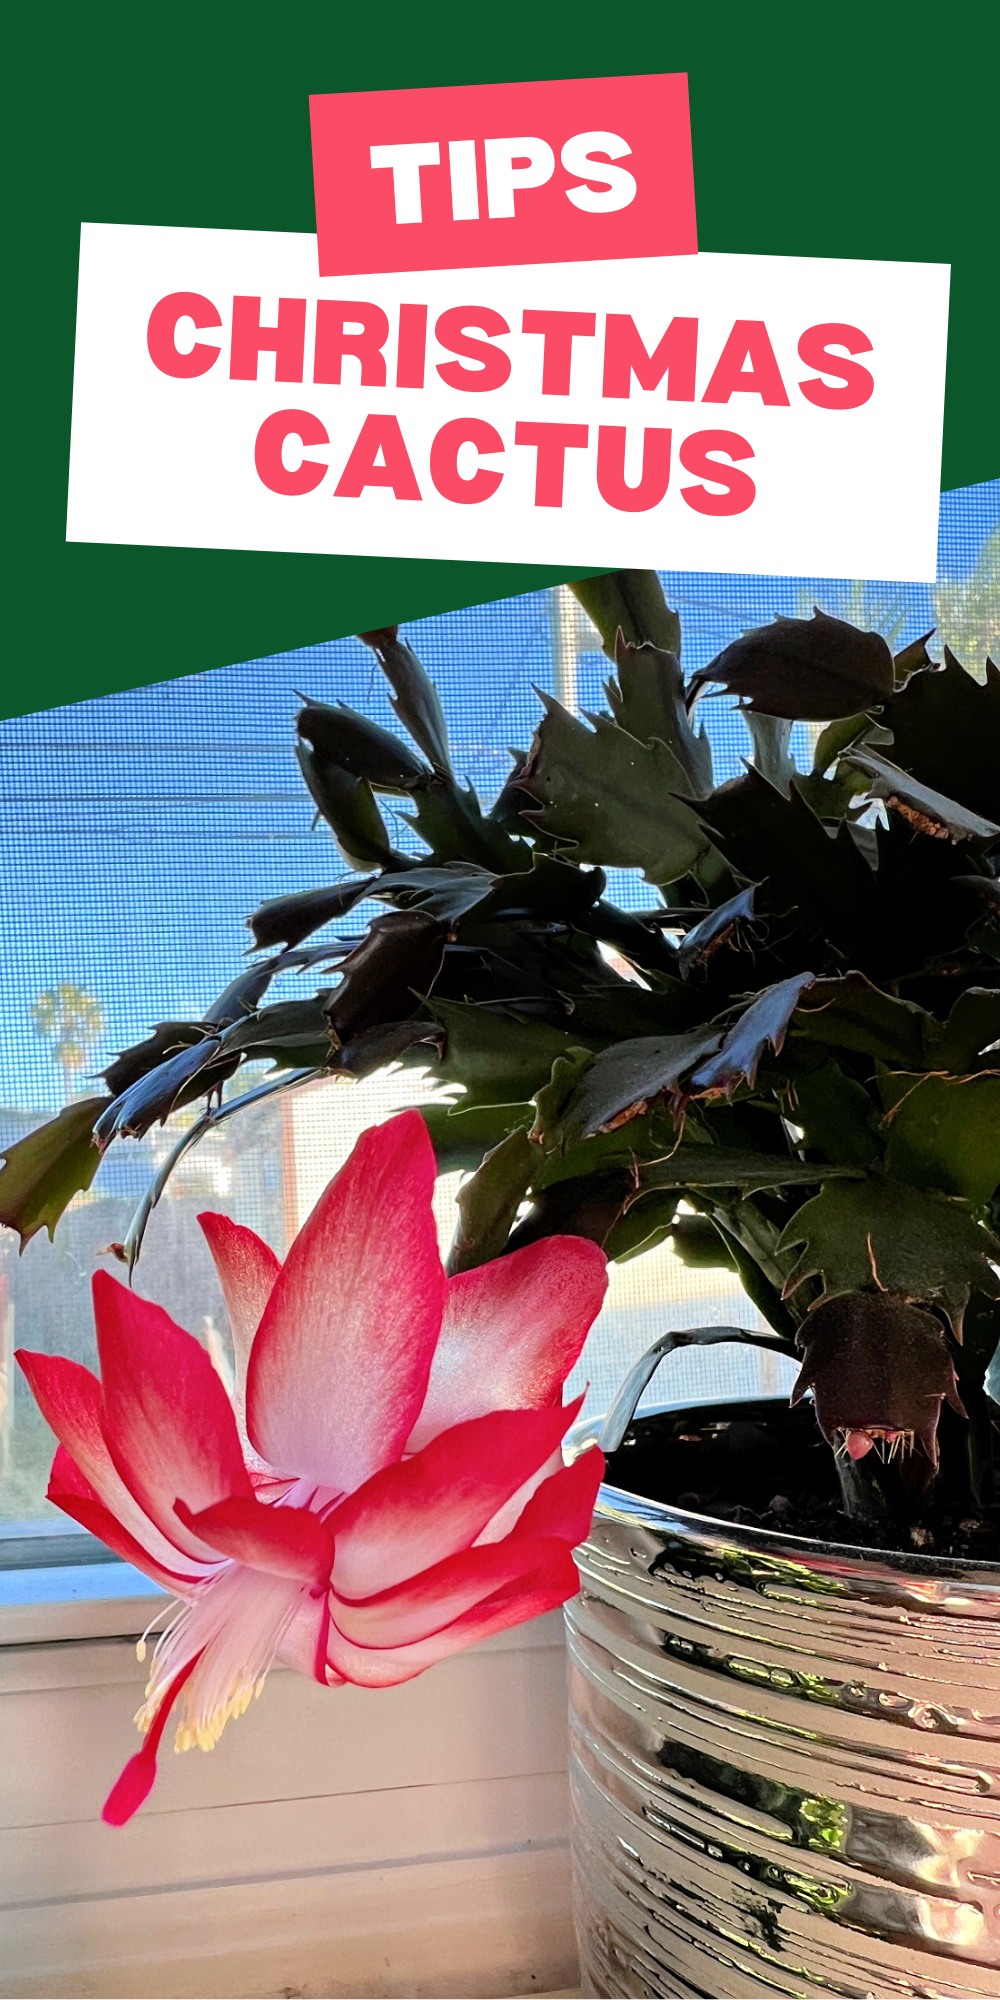 Are Coffee Grounds Good for Christmas Cactus